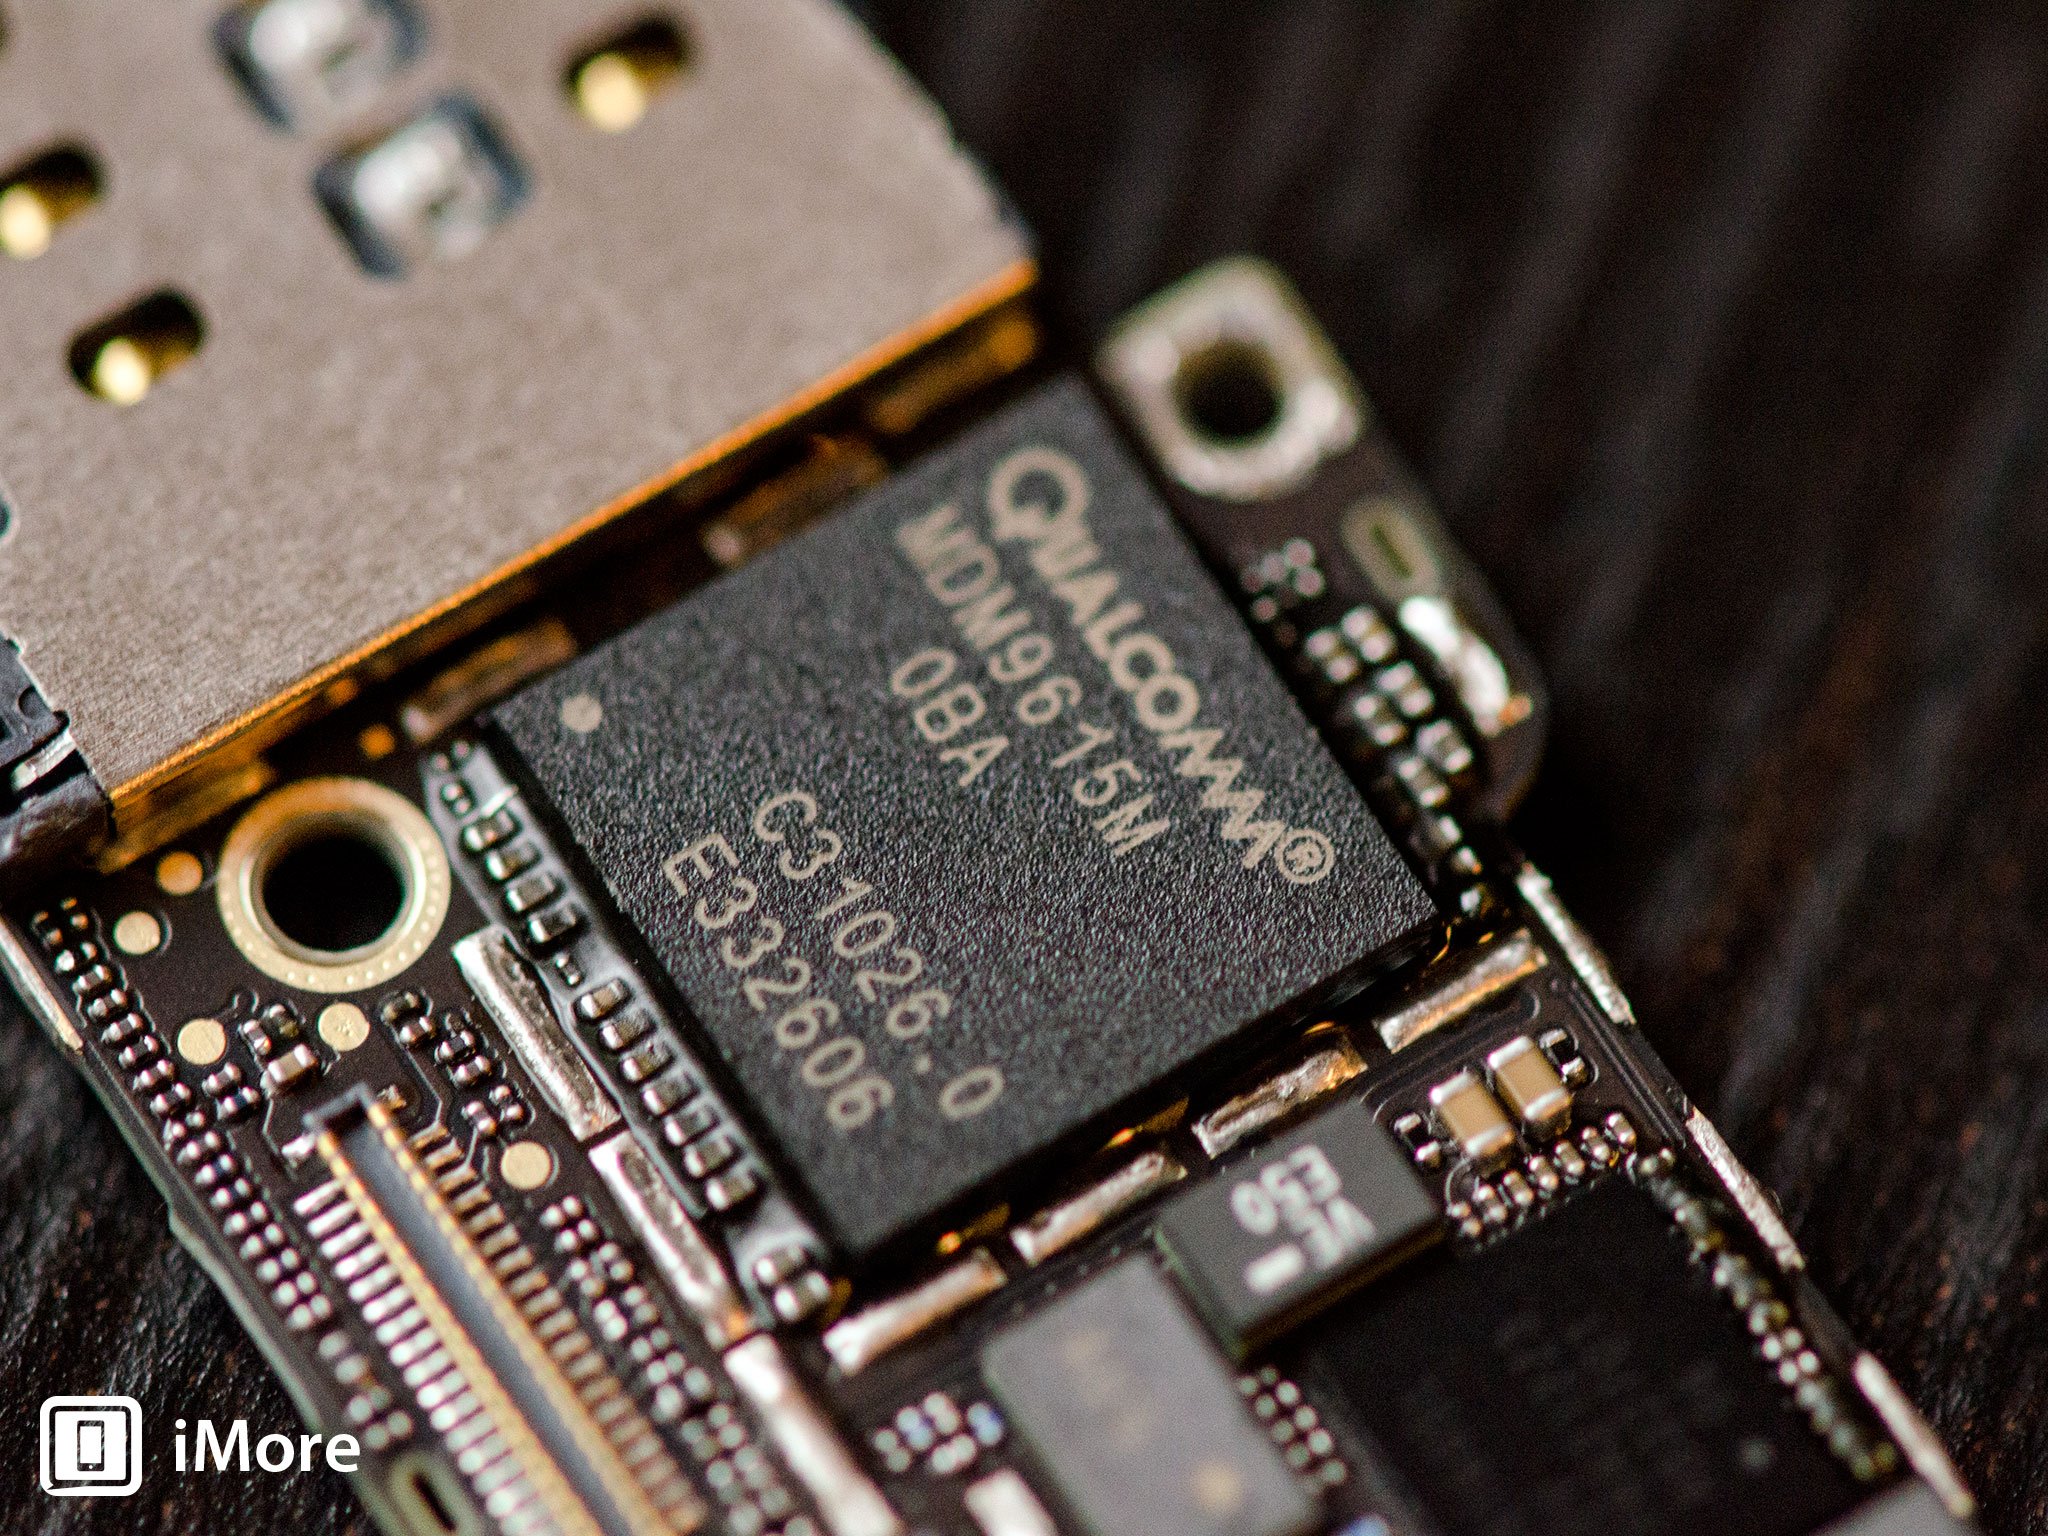 Another view of the Qualcomm LTE chipset